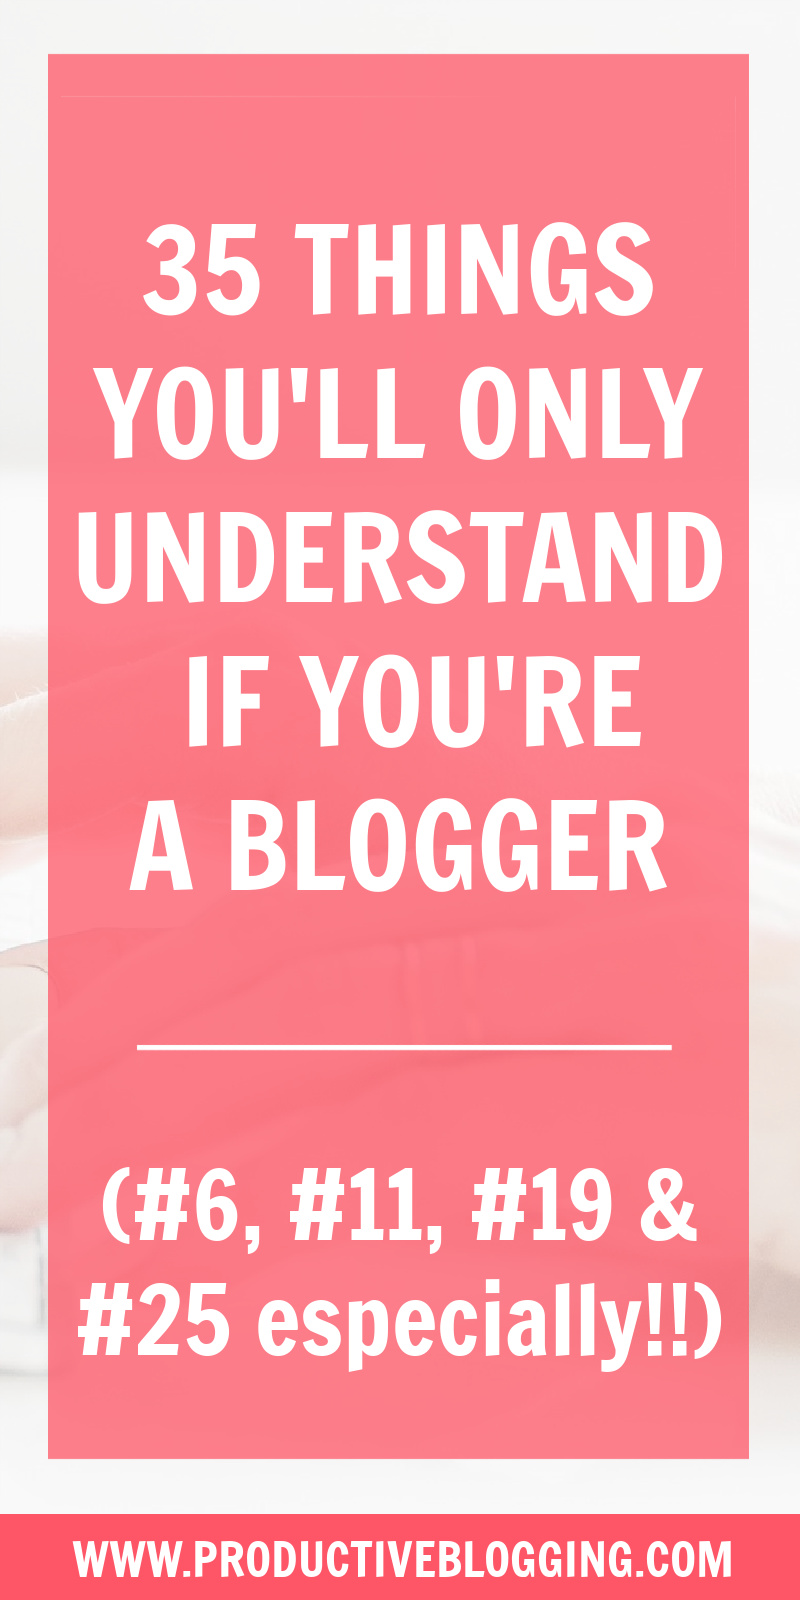 35 things you'll only understand if you're a blogger. Blogging is a strange occupation. Even our nearest and dearest don’t really ‘get’ it. But if you’re a blogger you’ll identify with all of these! #blogginglife #bloglife #blog #blogging #blogger #bloggersofpinterest #professionalblogger #bloggingismyjob #solopreneur #mompreneur #fempreneur #contentmarketing #bloggingbiz #bloggingtips #productivitytips #productivity #productivebloggingcommunity #BSNH #blogsmarternotharder #productiveblogging